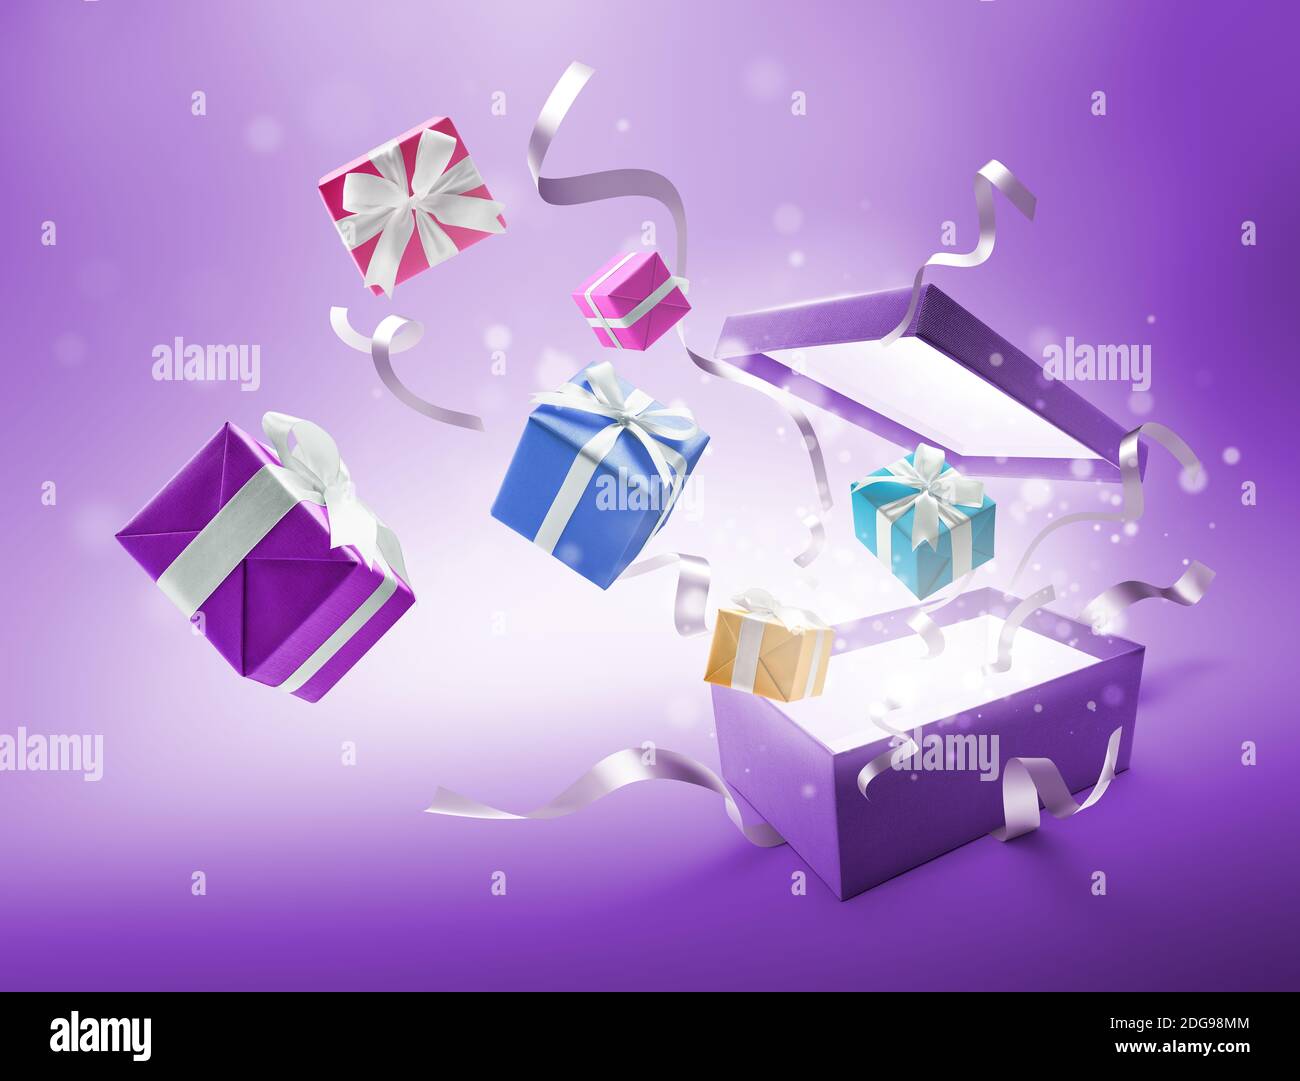 Ribbons and gifts bursting out from purple color open gift box Stock Photo